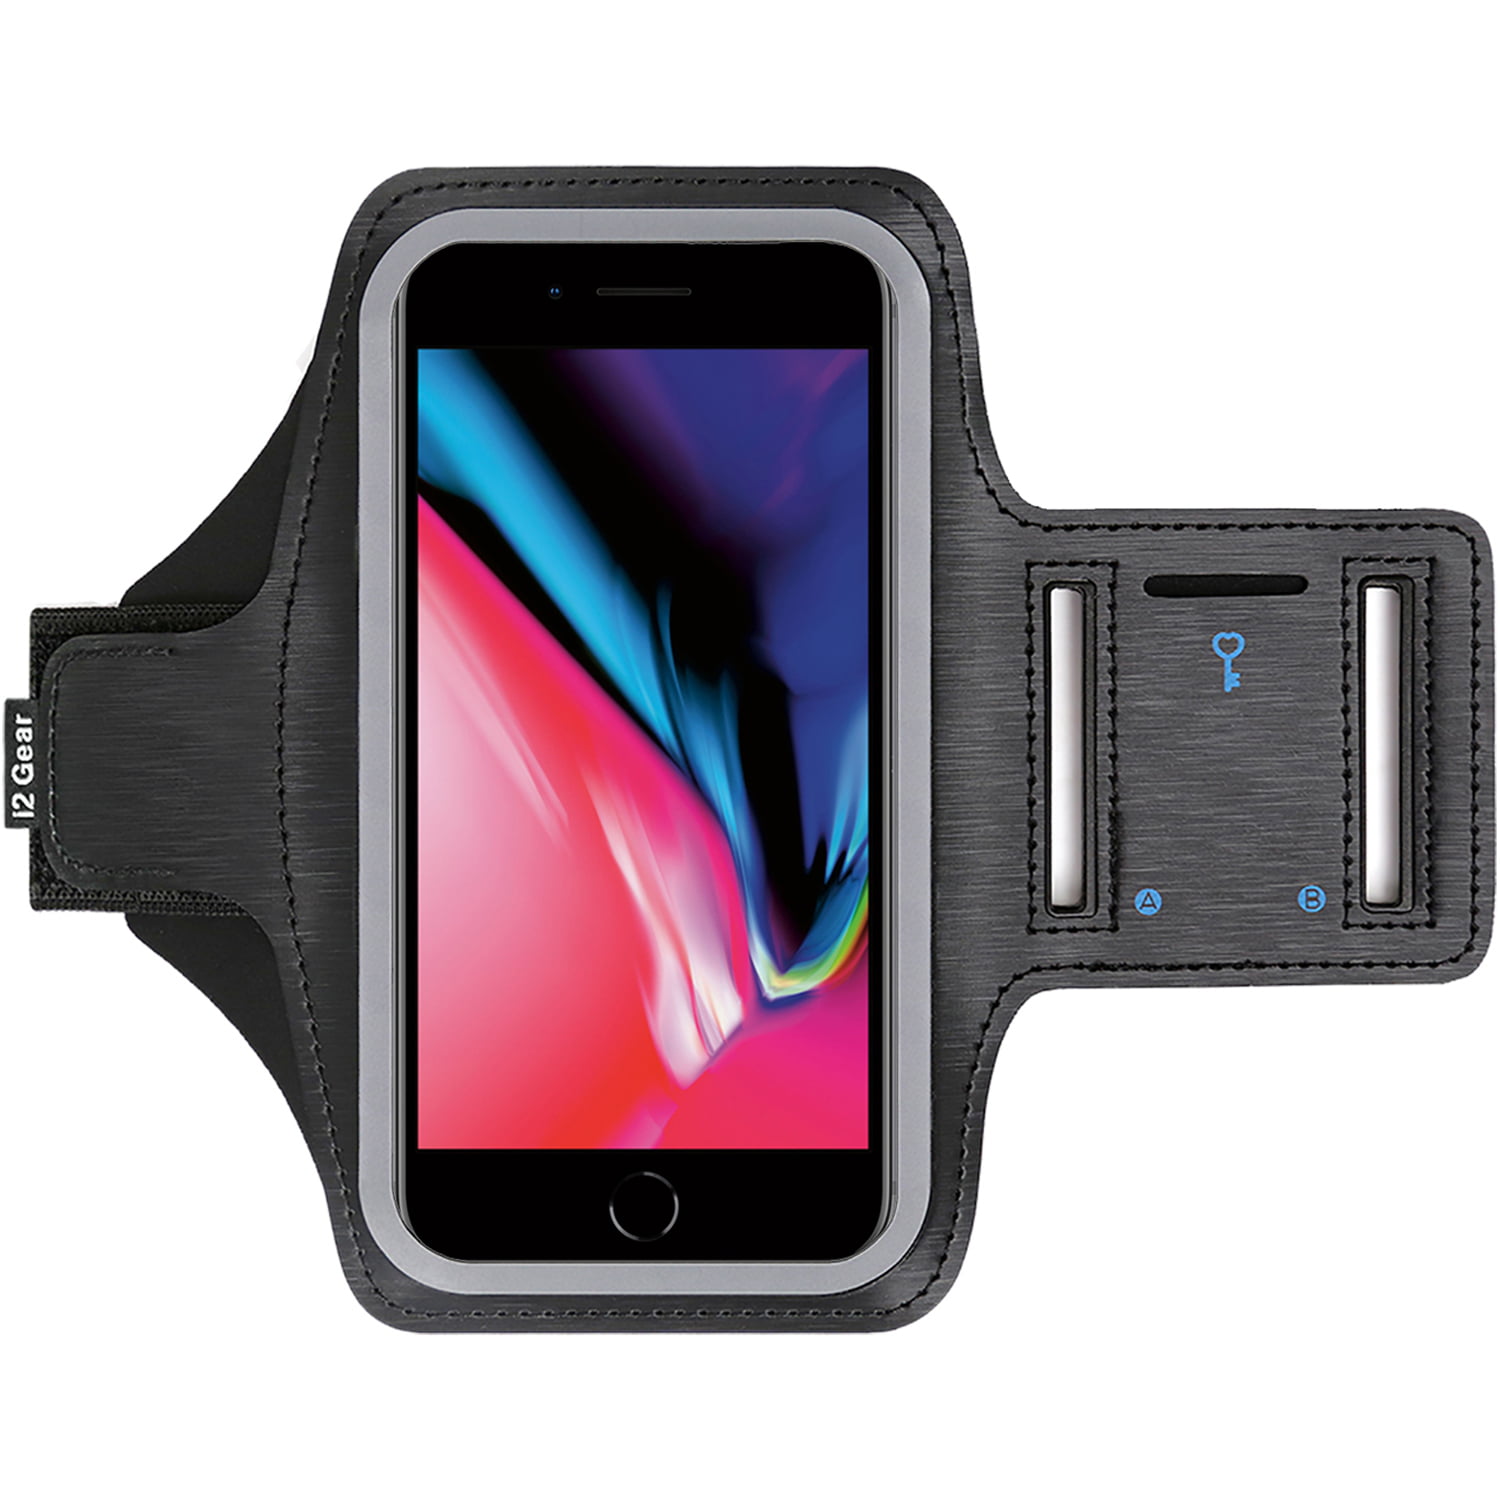 i2 Gear Phone Armband for iPhone 8, 7, 6 - Cell Phone for Running Jogging Gym Exercise with Key Holder and Reflective Surface Black -